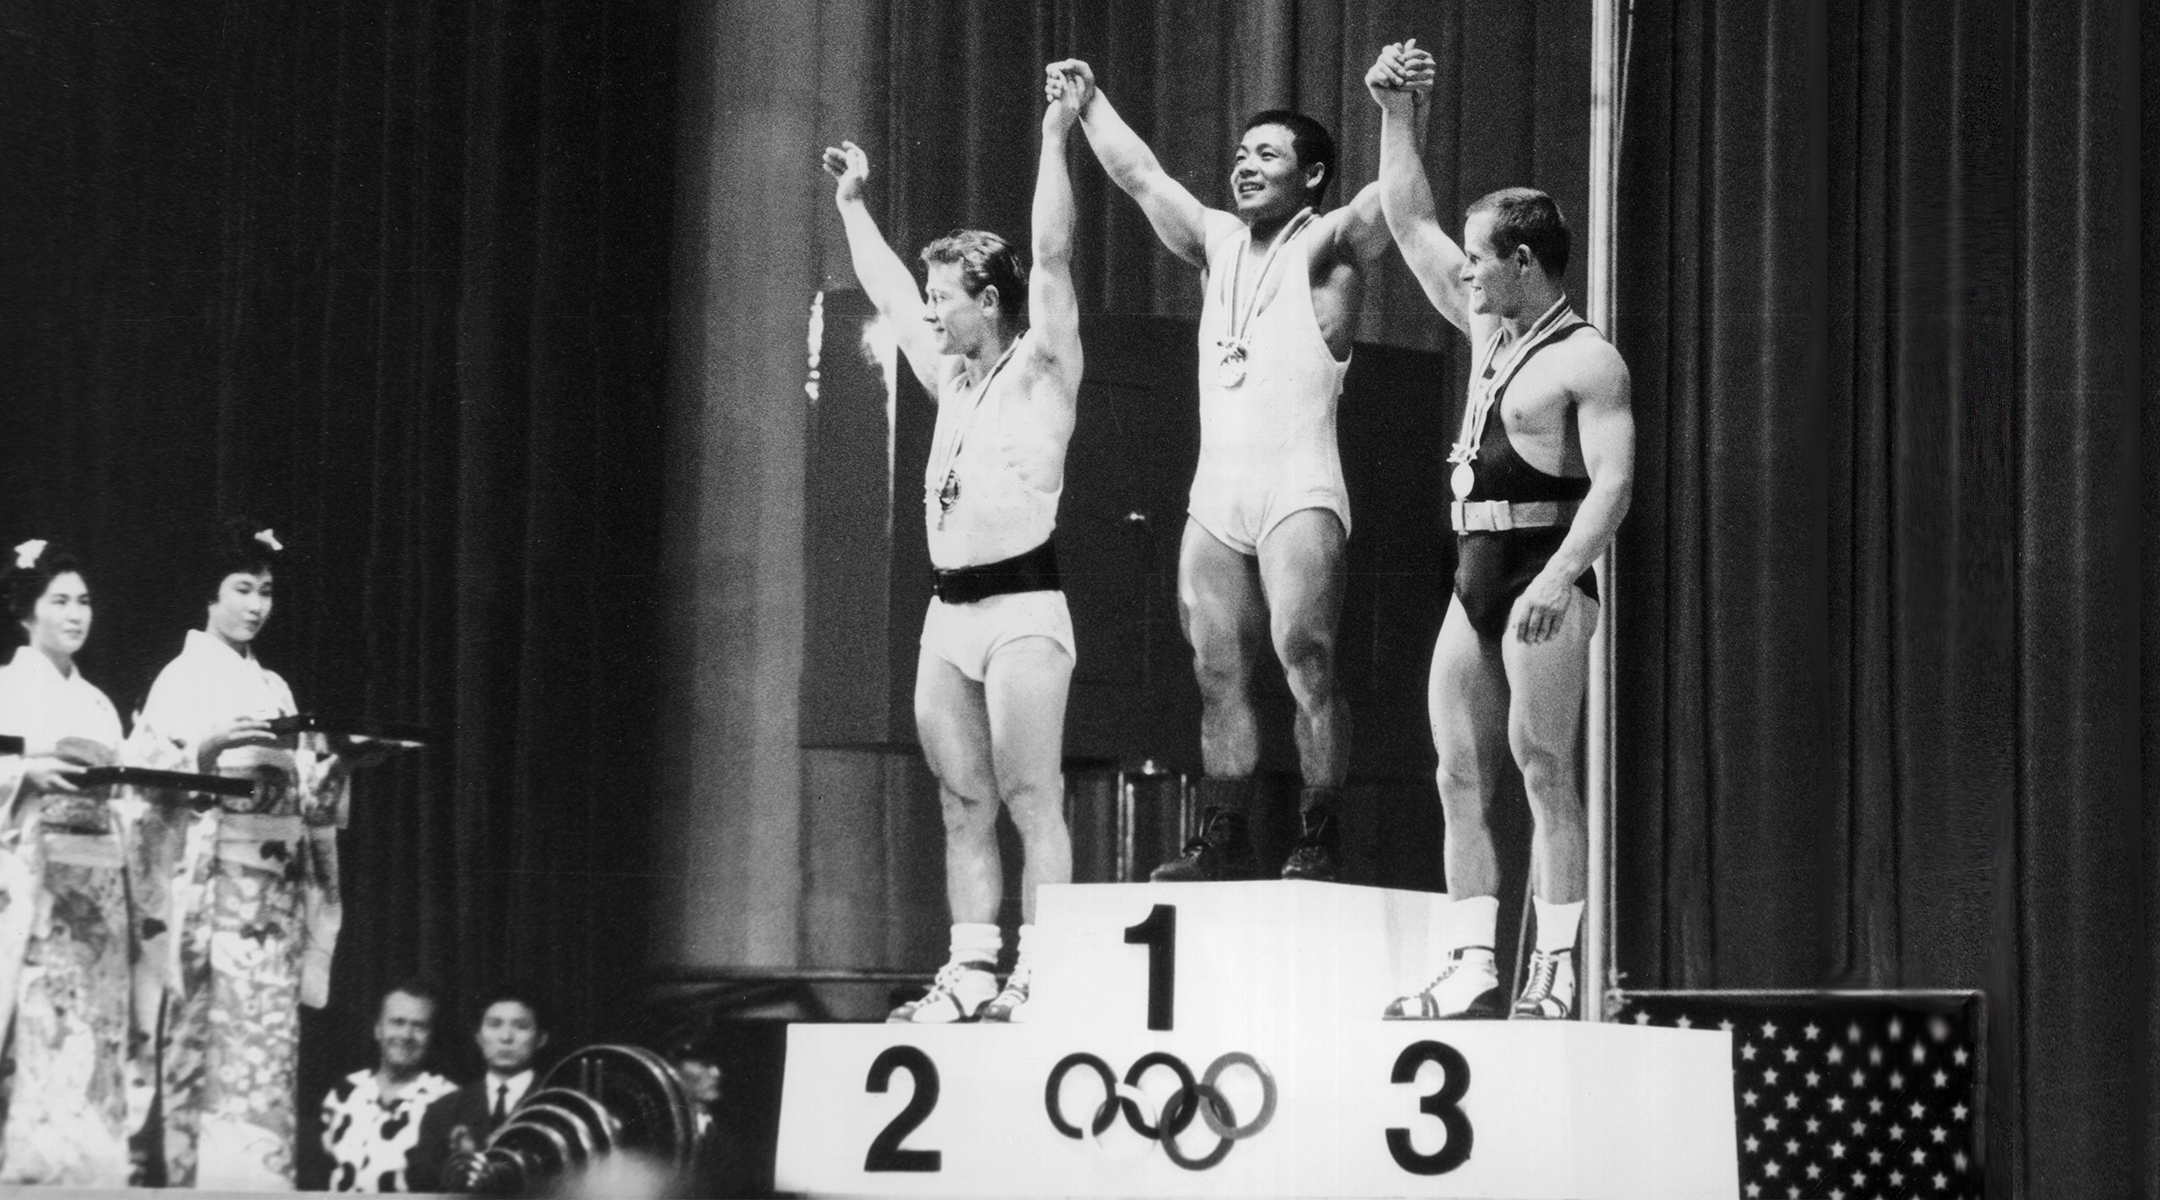 Isaac Berger, left, at the 1964 Tokyo Olympics. (Central Press/Hulton Archive/Getty Images)